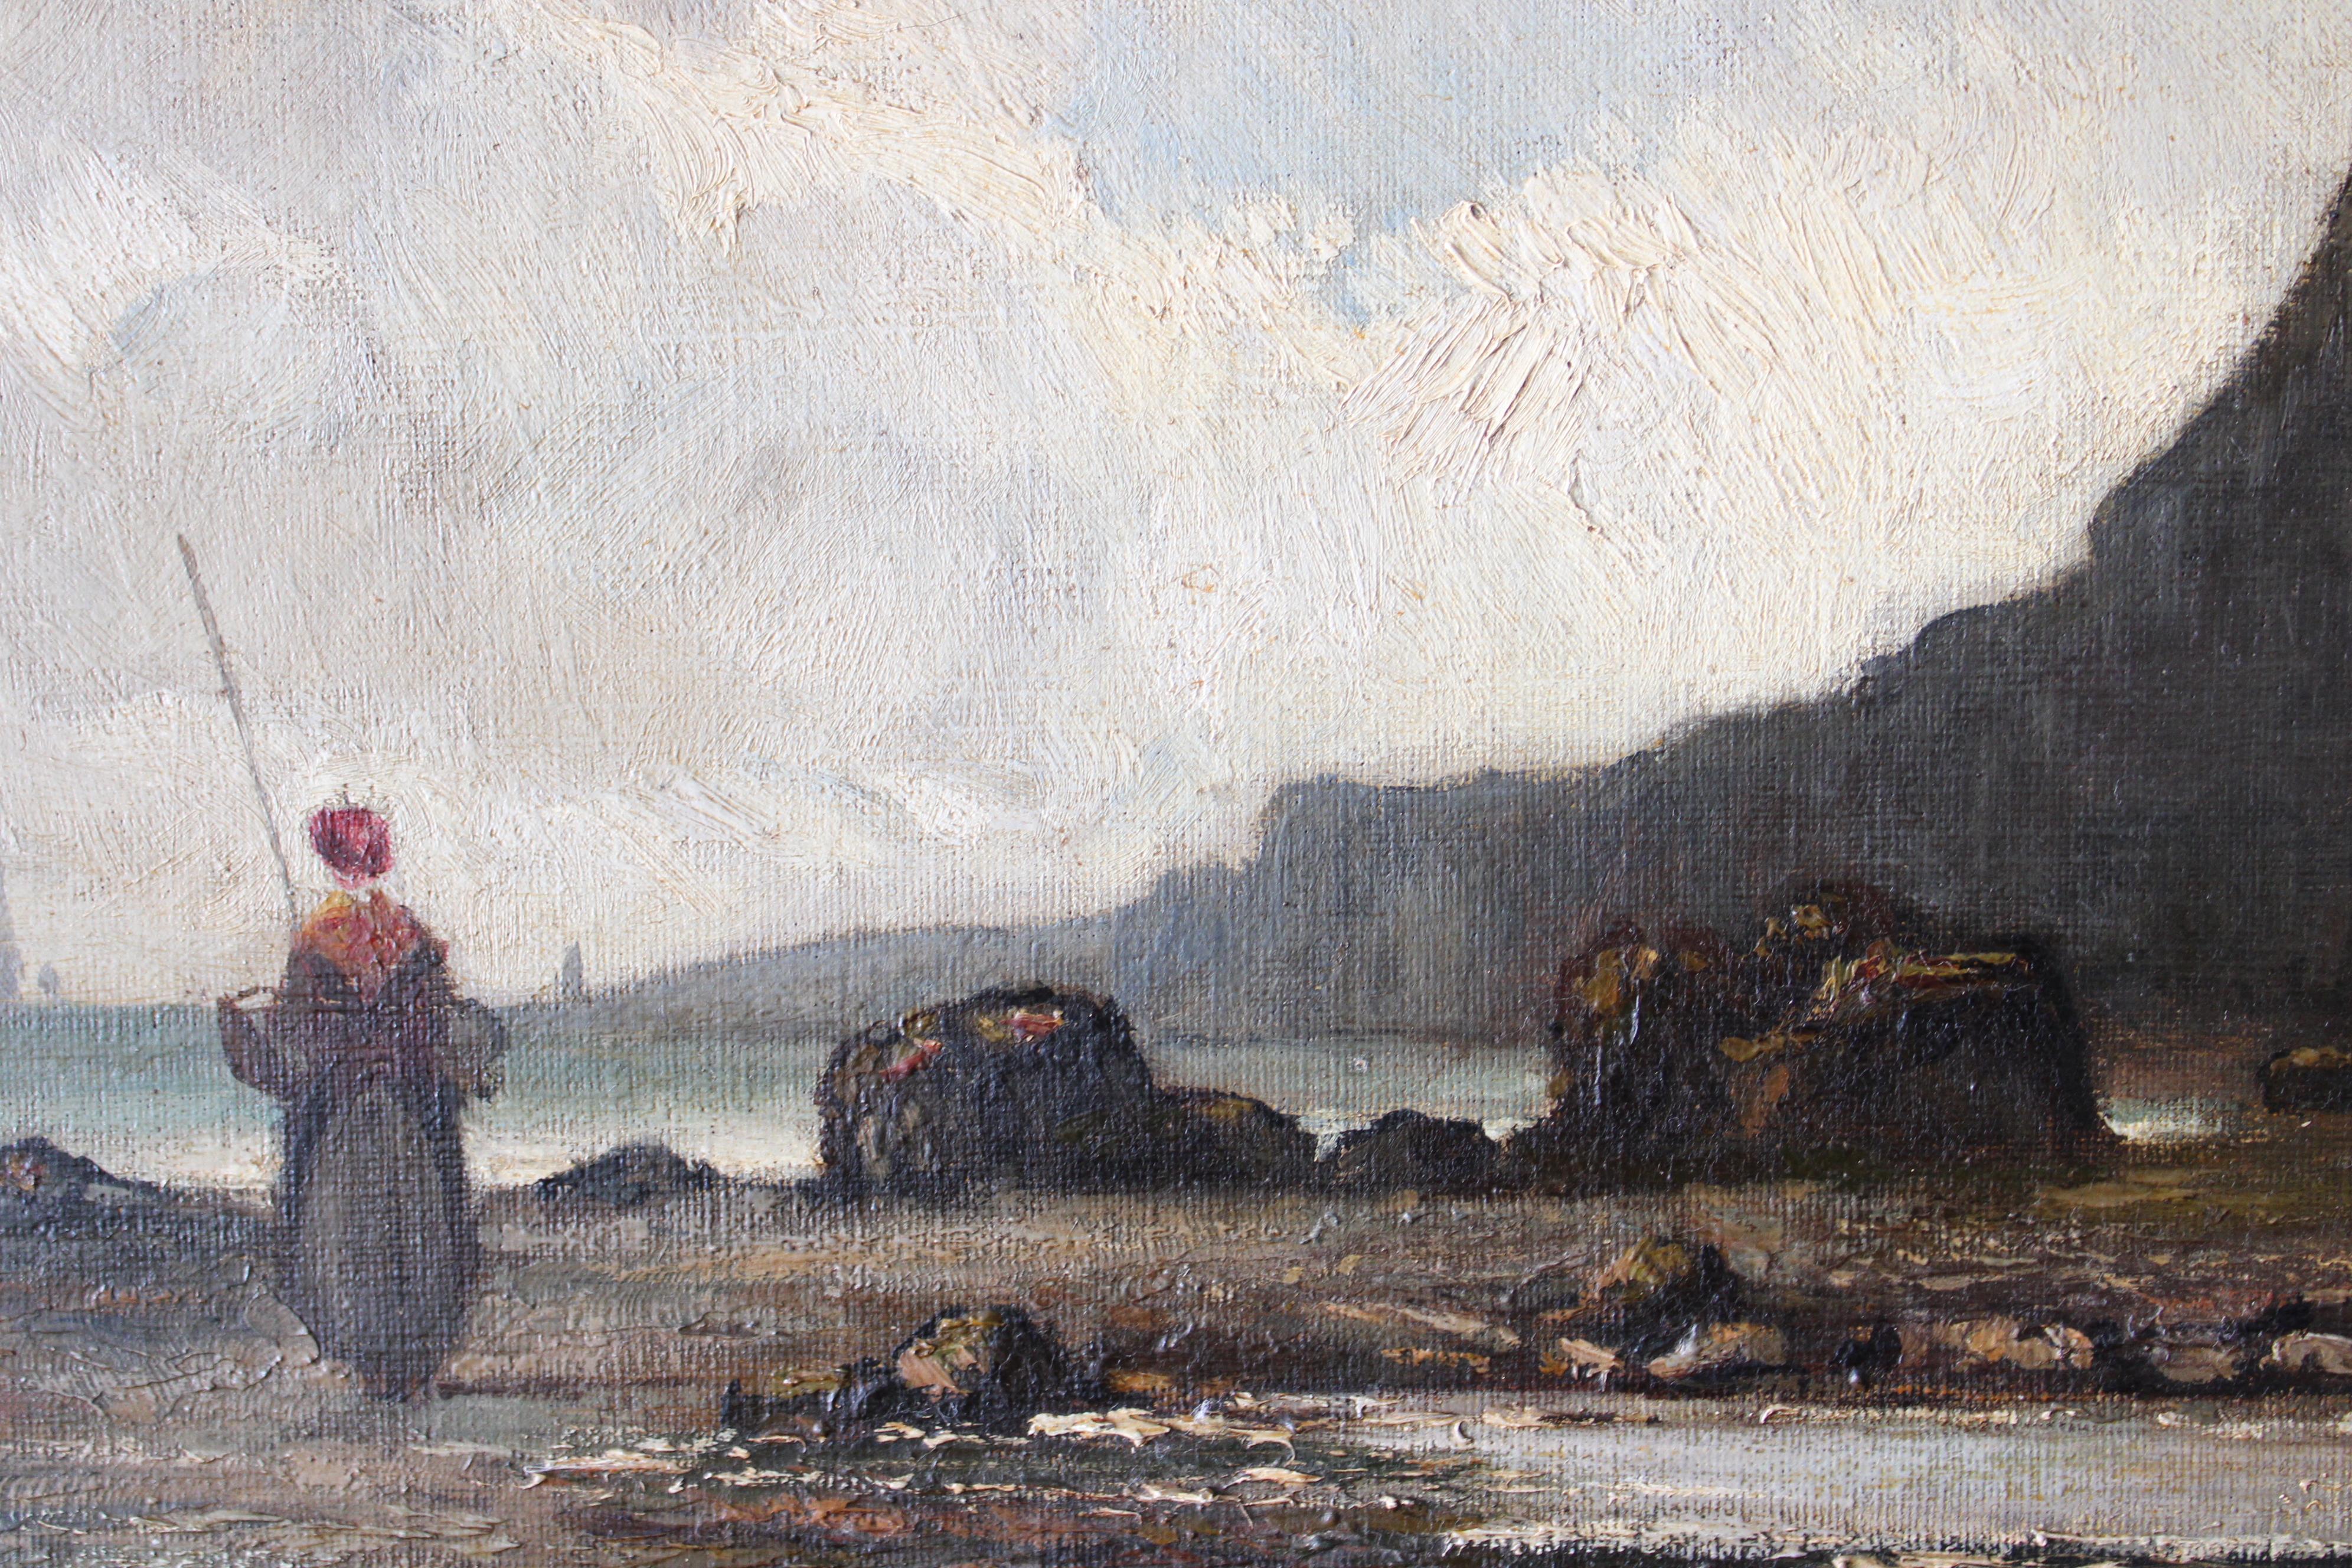 Antique French seascape coastal oil painting from the  early 1900's signed and dated in the bottom right.  A beach scene with a woman fishing.  A rocky beach in the fore with sailing ships on the horizon. It's well painted and very atmospheric with